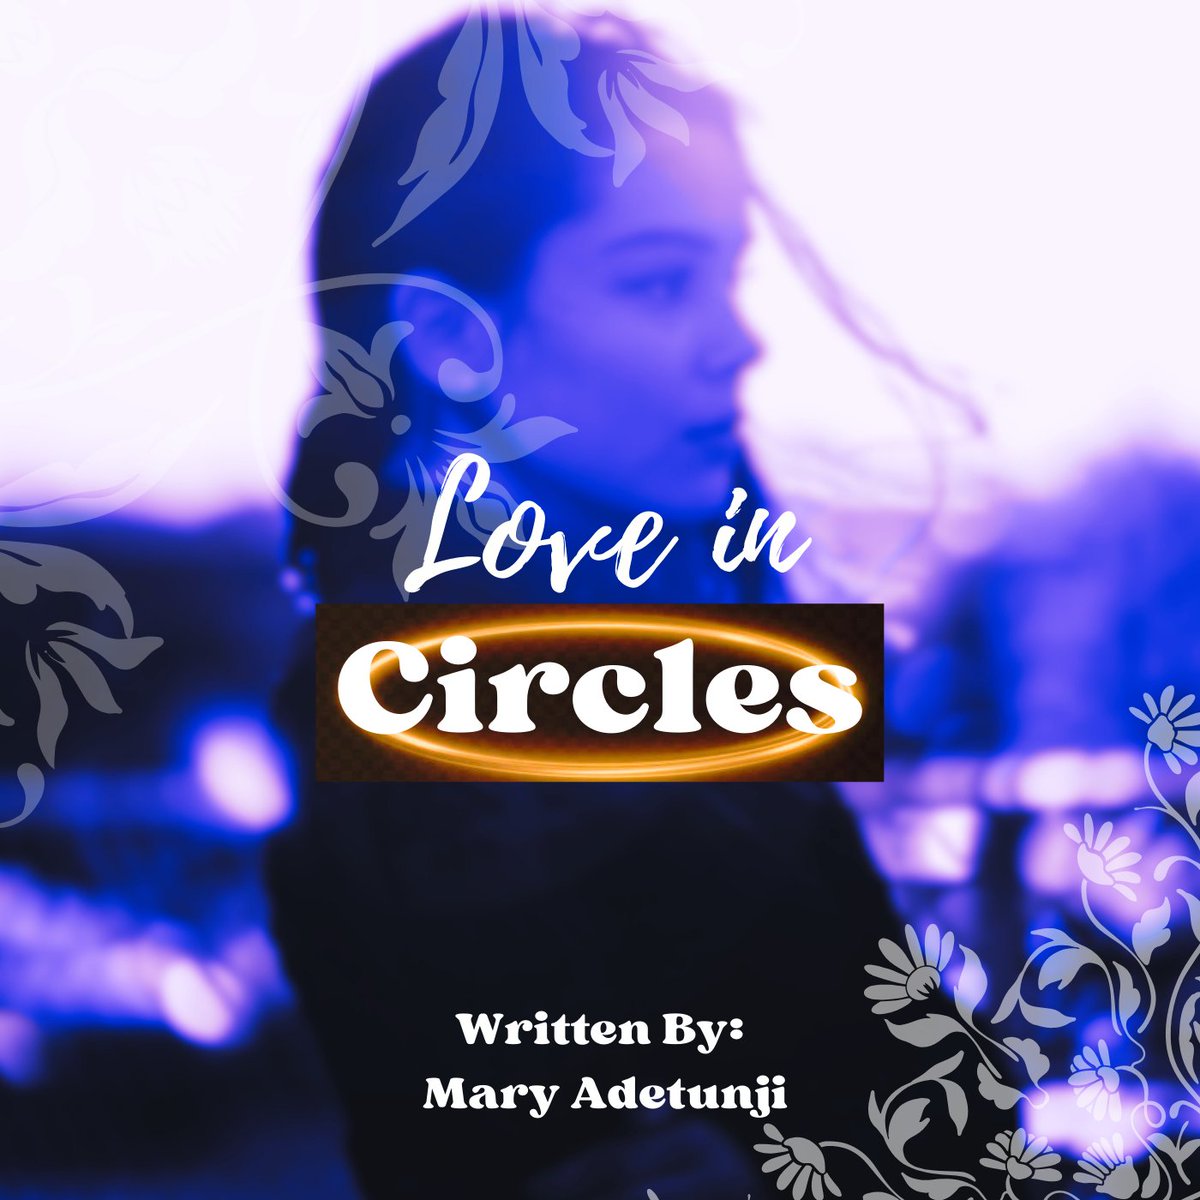 instagram.com/p/C3U7SLfI2cI/…

Our story is here💃💃💃. Happy Valentines day to you too😌😊.
Episode One is up. Read, enjoy and be blessed💯🤗🤗

Make sure to like, comment and share too😊

#lovestory 
#storyseries 
#loveincircles
#happyvalentinesday 
#tmwritez